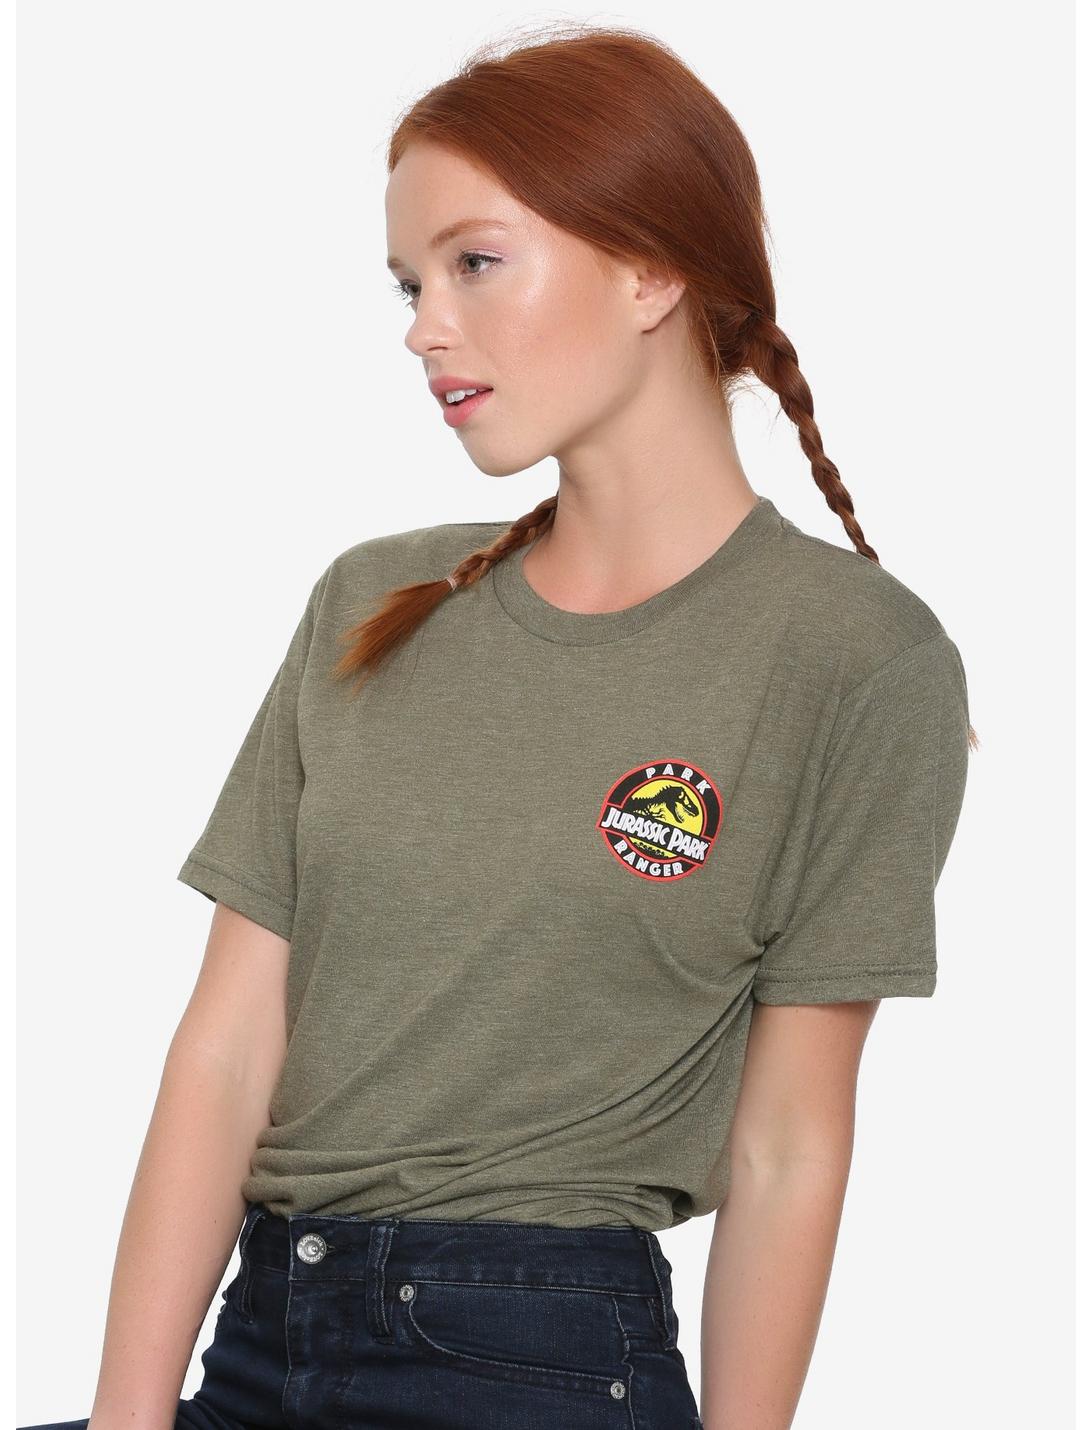 Jurassic Park Ranger Womens Tee - BoxLunch Exclusive, OLIVE, hi-res